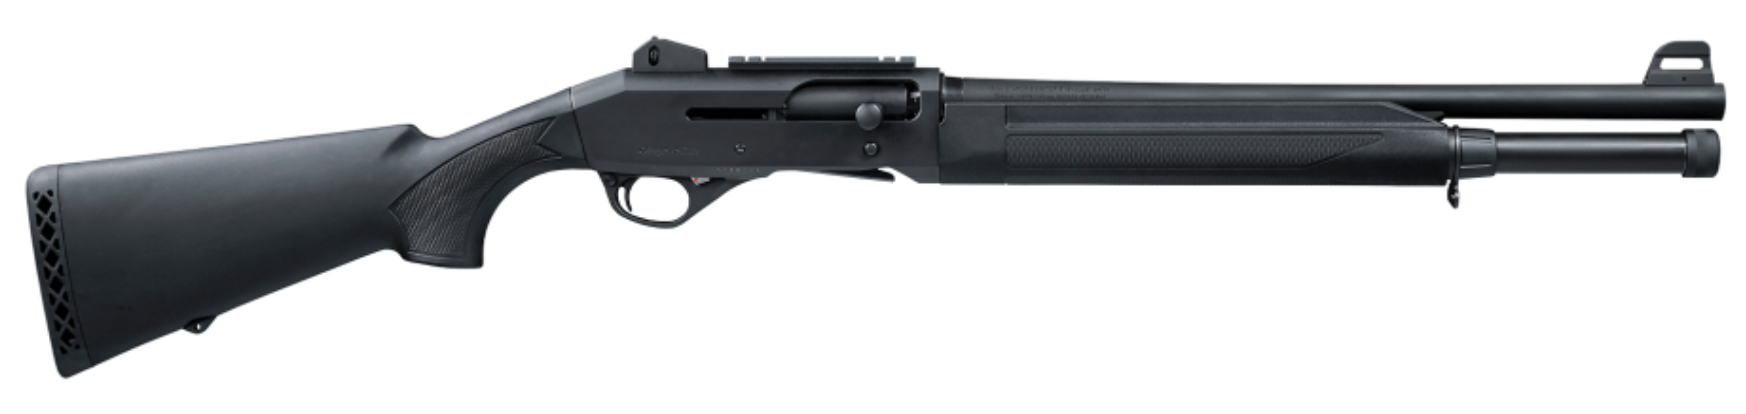 Stoeger Industries: Profiling the Quality and Affordability of a Gunmaker